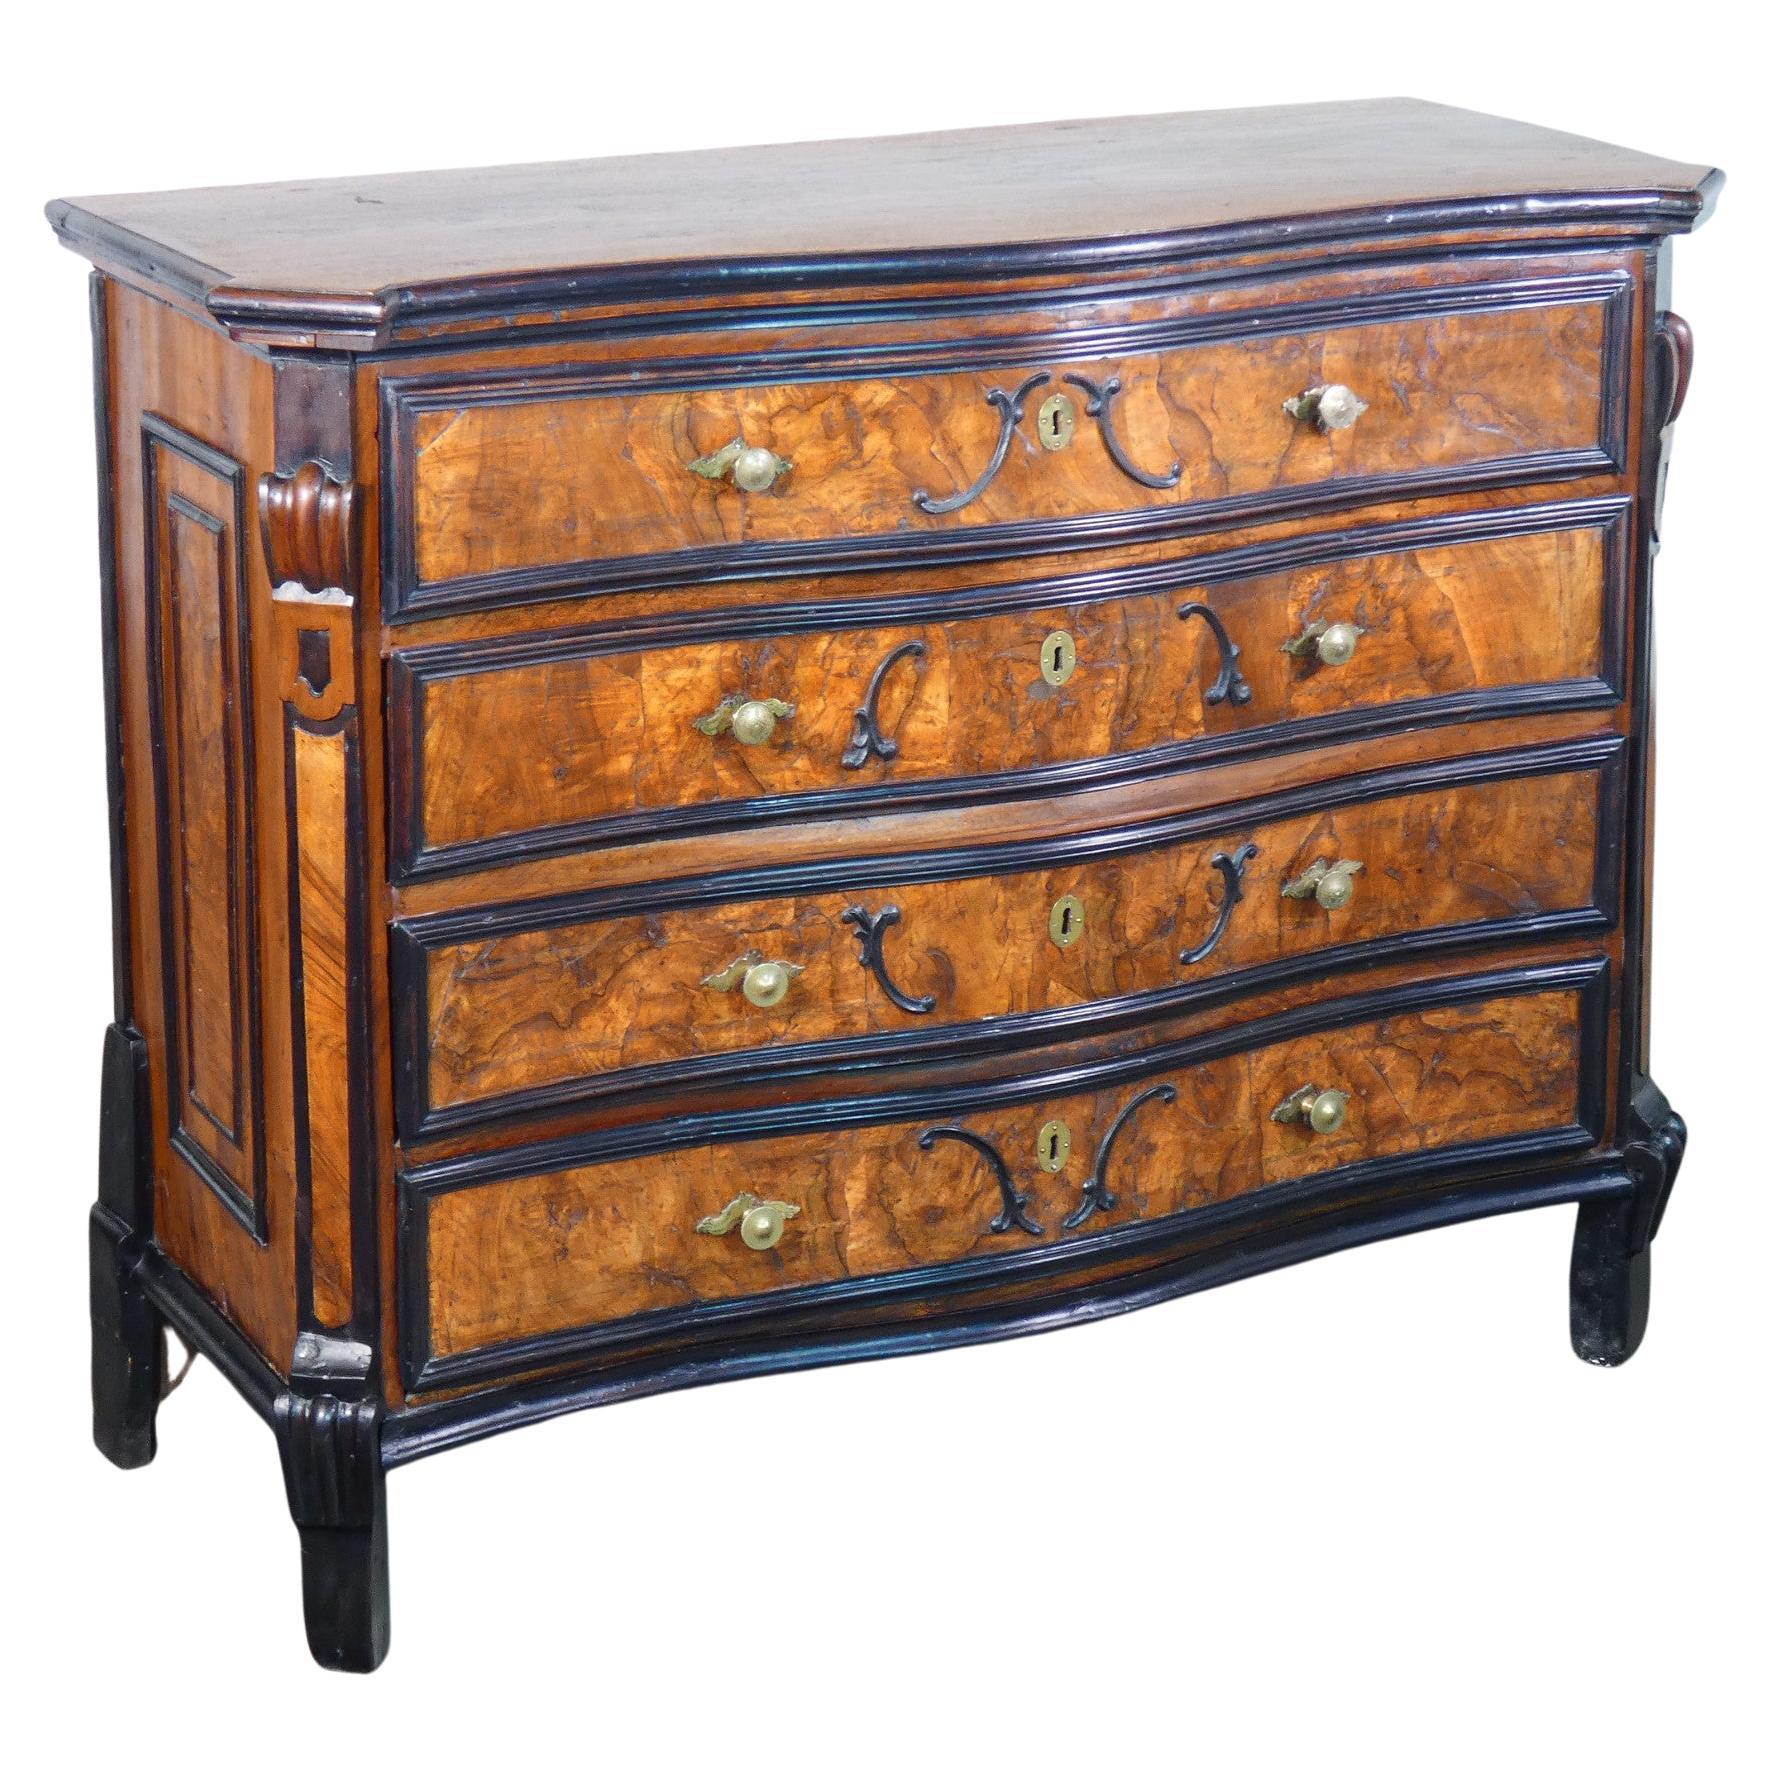 Original Louis XIV Chest of Drawers Walnut Wood and Briar Italy, Early 18th C. For Sale